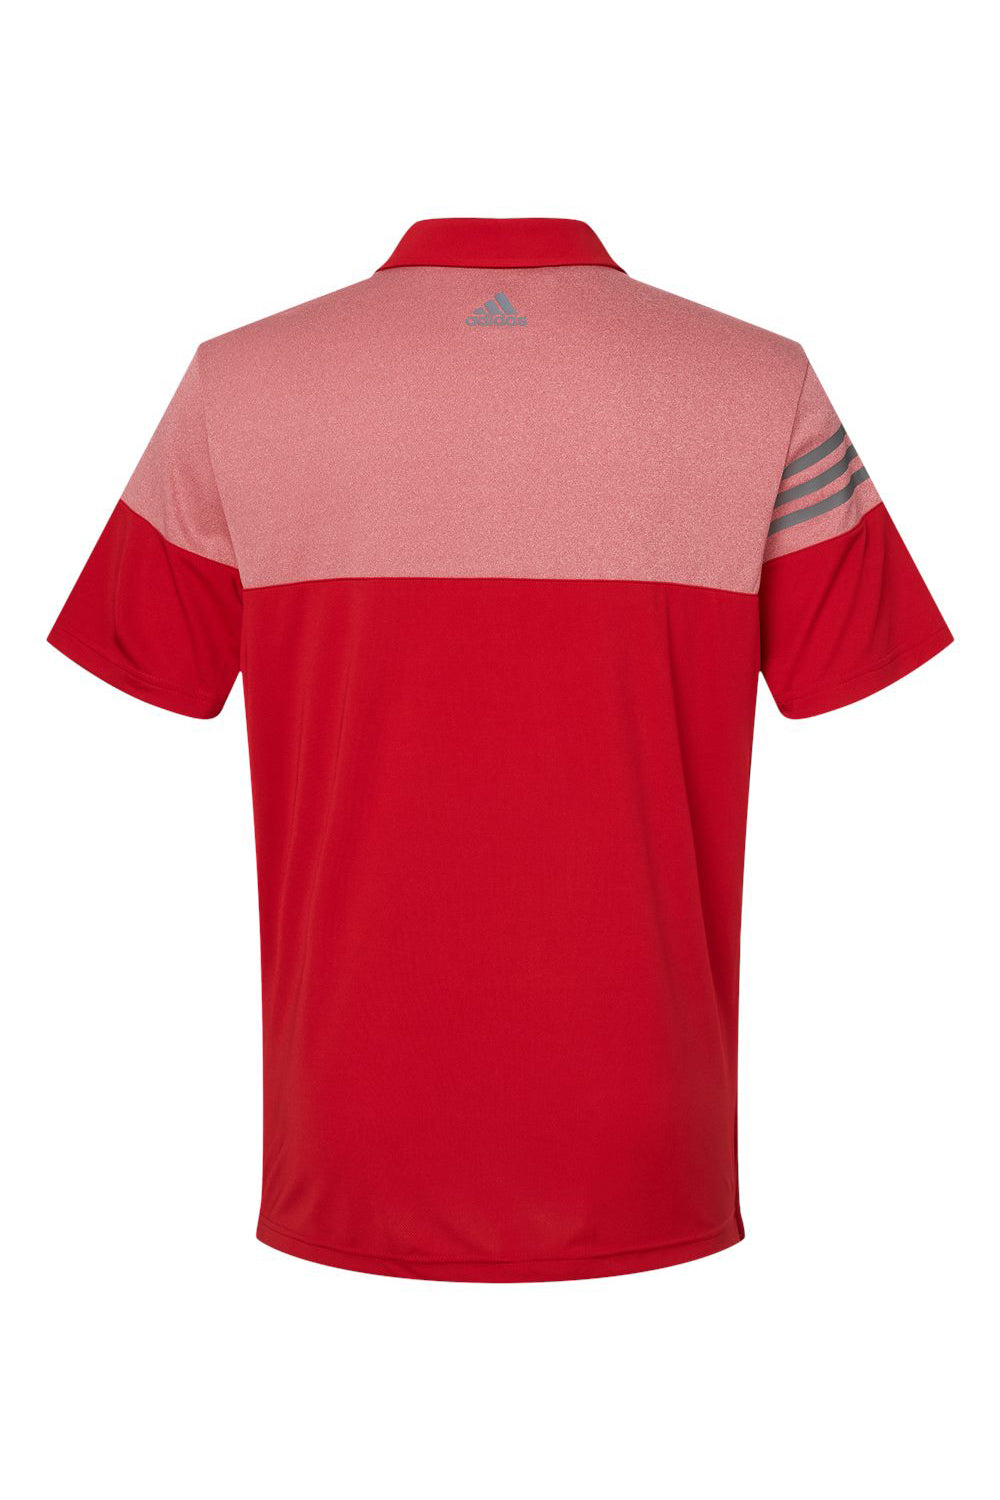 Adidas A213 Mens 3 Stripes Colorblock Moisture Wicking Short Sleeve Polo Shirt Power Red Flat Back